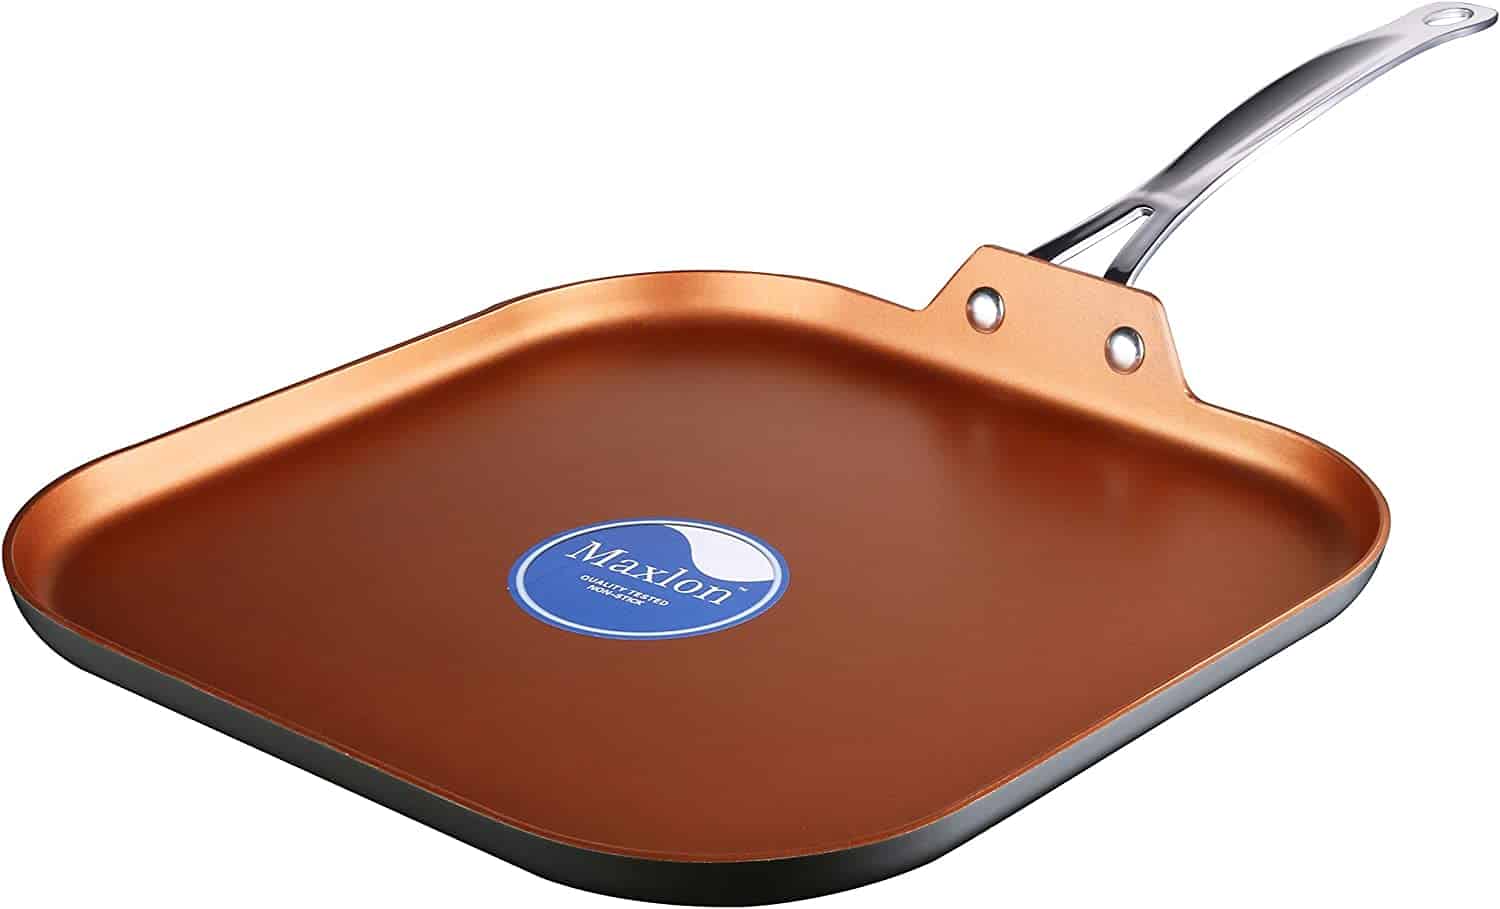 Best flat top square griddle pan for induction- COOKSMARK 11-Inch Copper